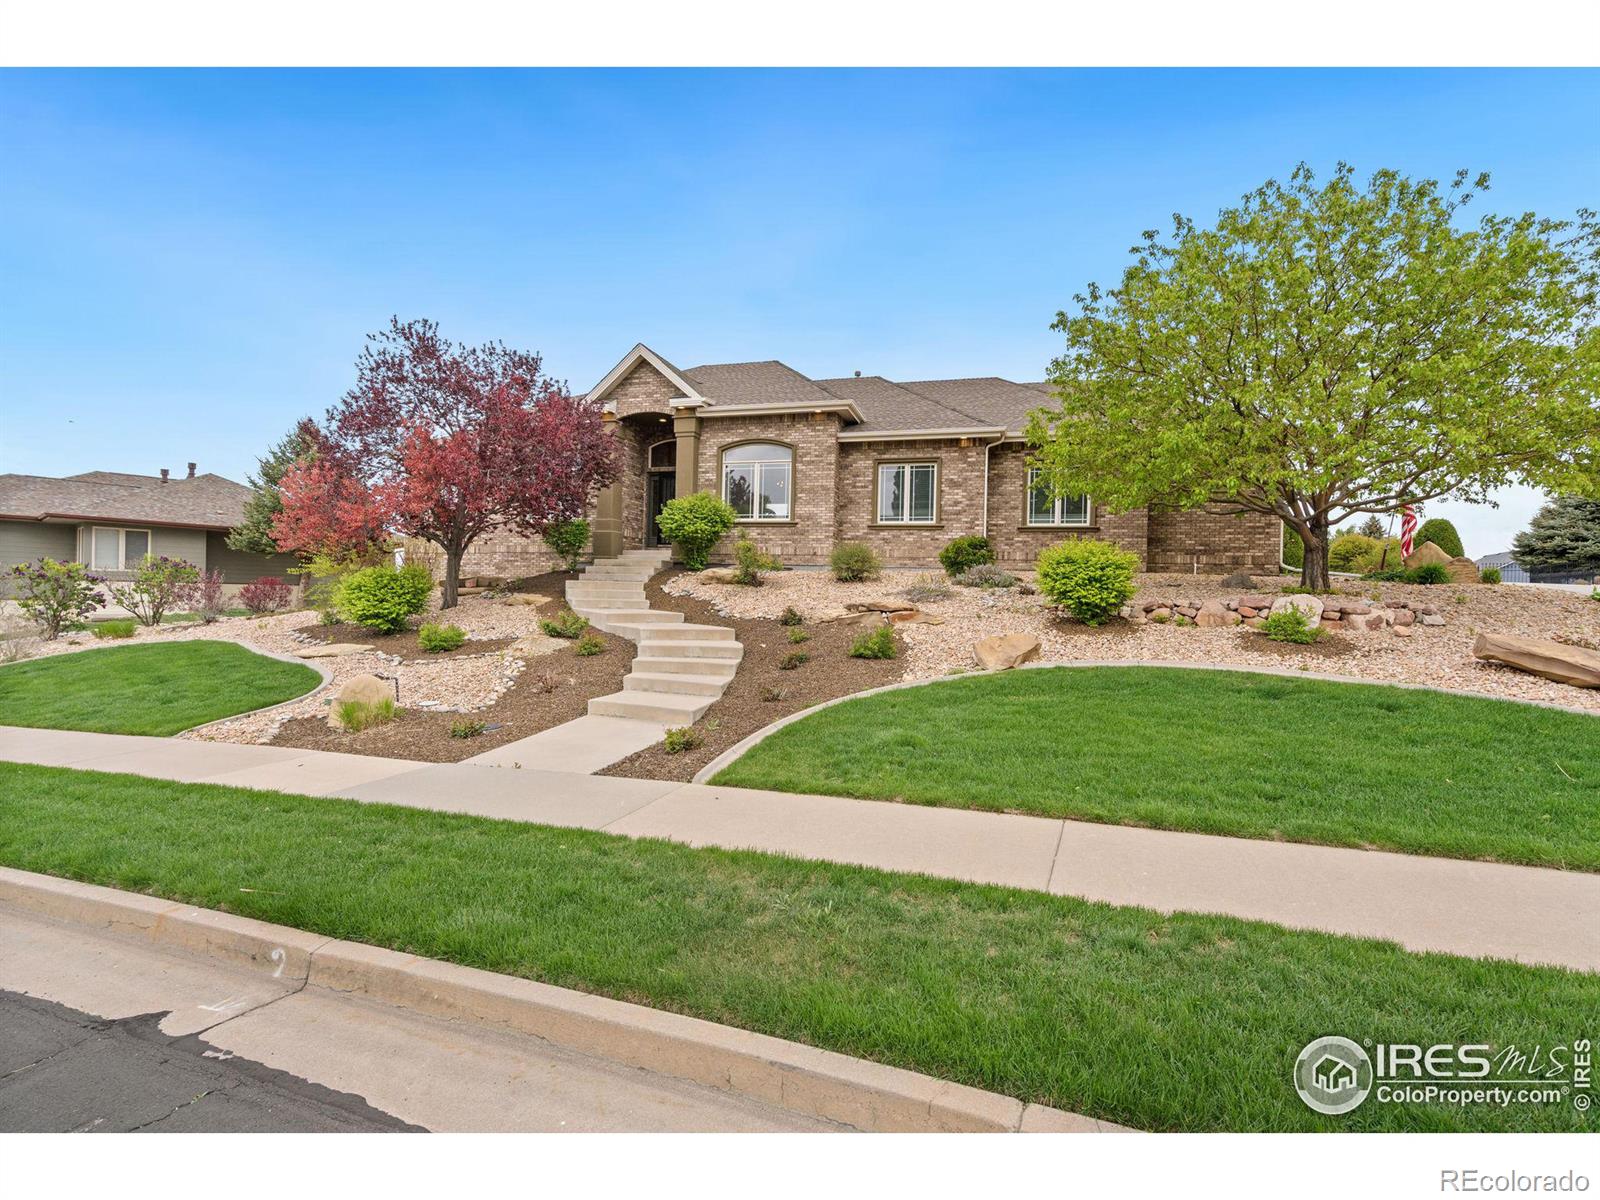 642  54th Ave Ct, greeley MLS: 4567891009259 Beds: 6 Baths: 4 Price: $785,000